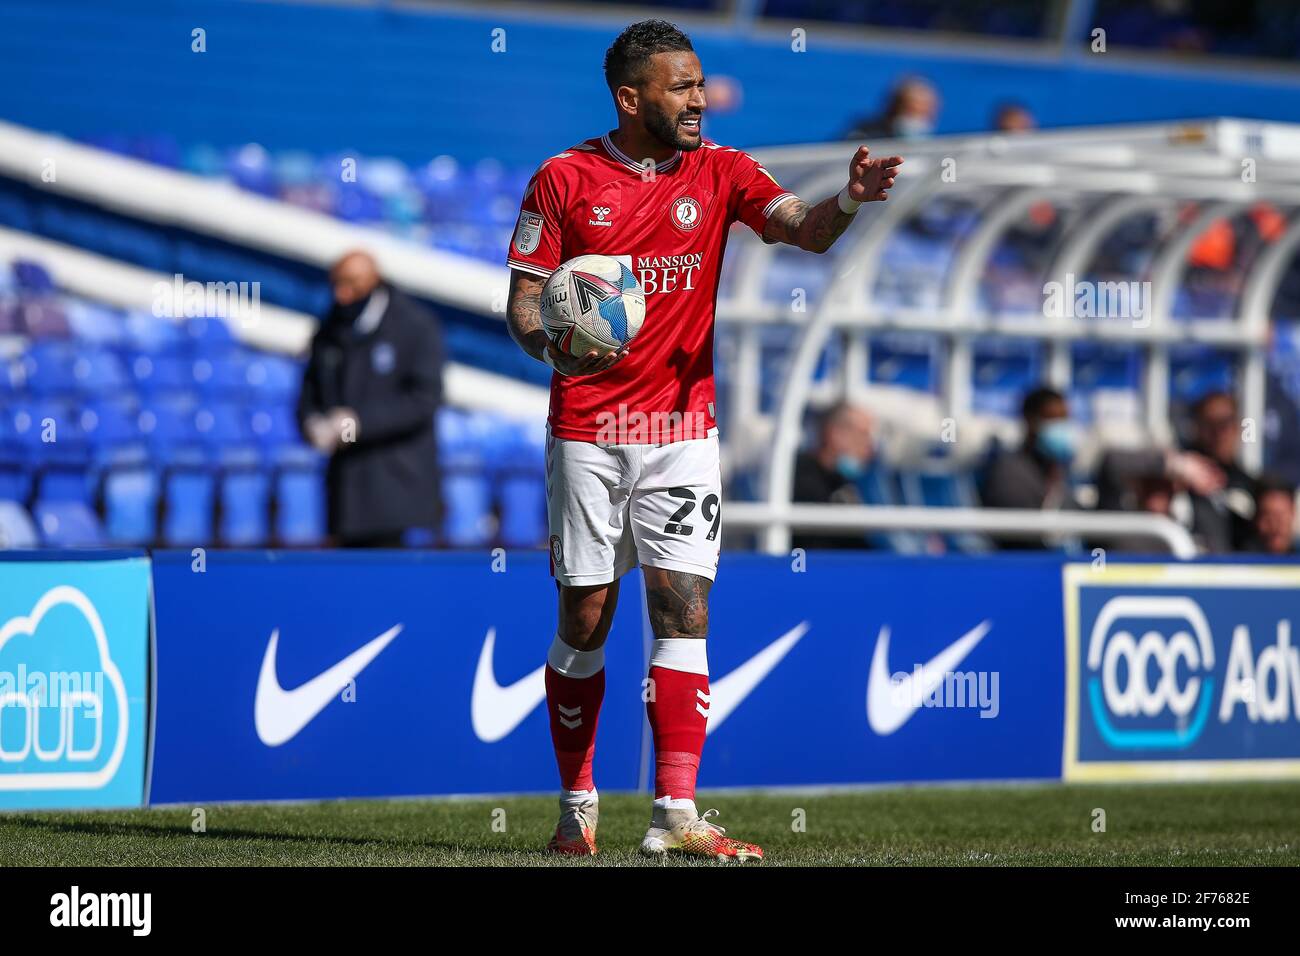 Birmingham, UK. 05th Apr, 2021. Danny Simpson #29 of Bristol City takes a throw in in Birmingham, UK on 4/5/2021. (Photo by Simon Bissett/News Images/Sipa USA) Credit: Sipa USA/Alamy Live News Stock Photo